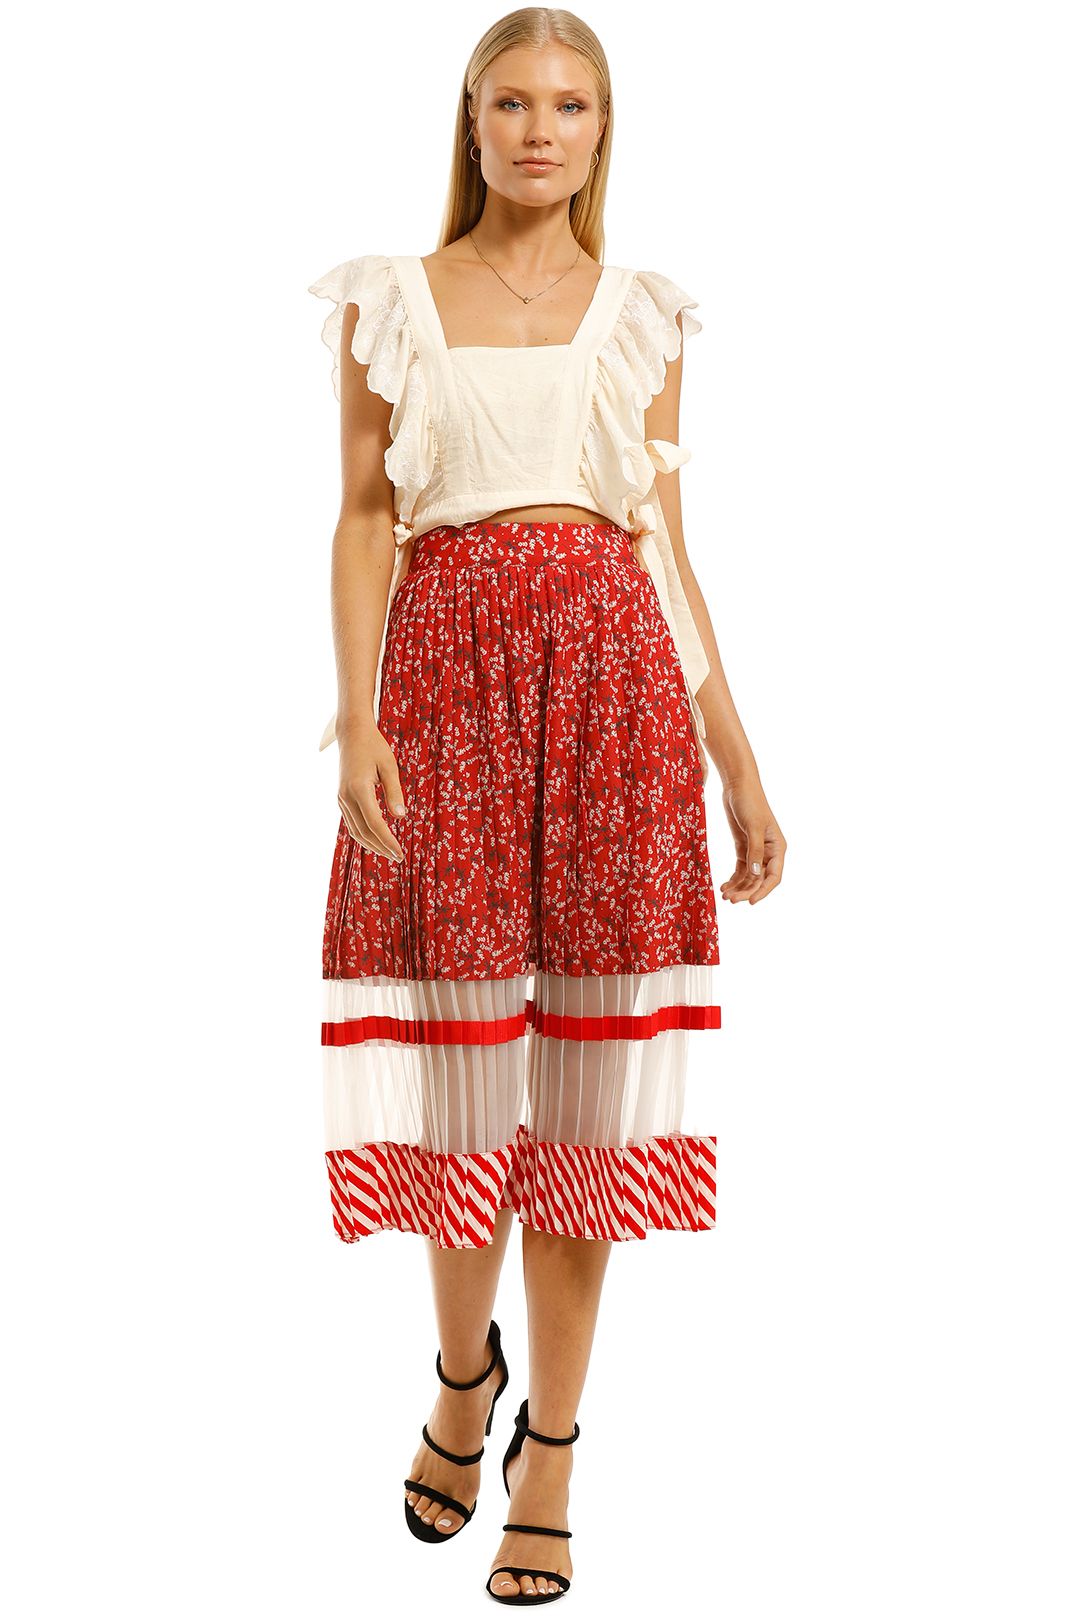 Curate-by-Trelise-Cooper-Hot Pleat-Skirt-Red-Front